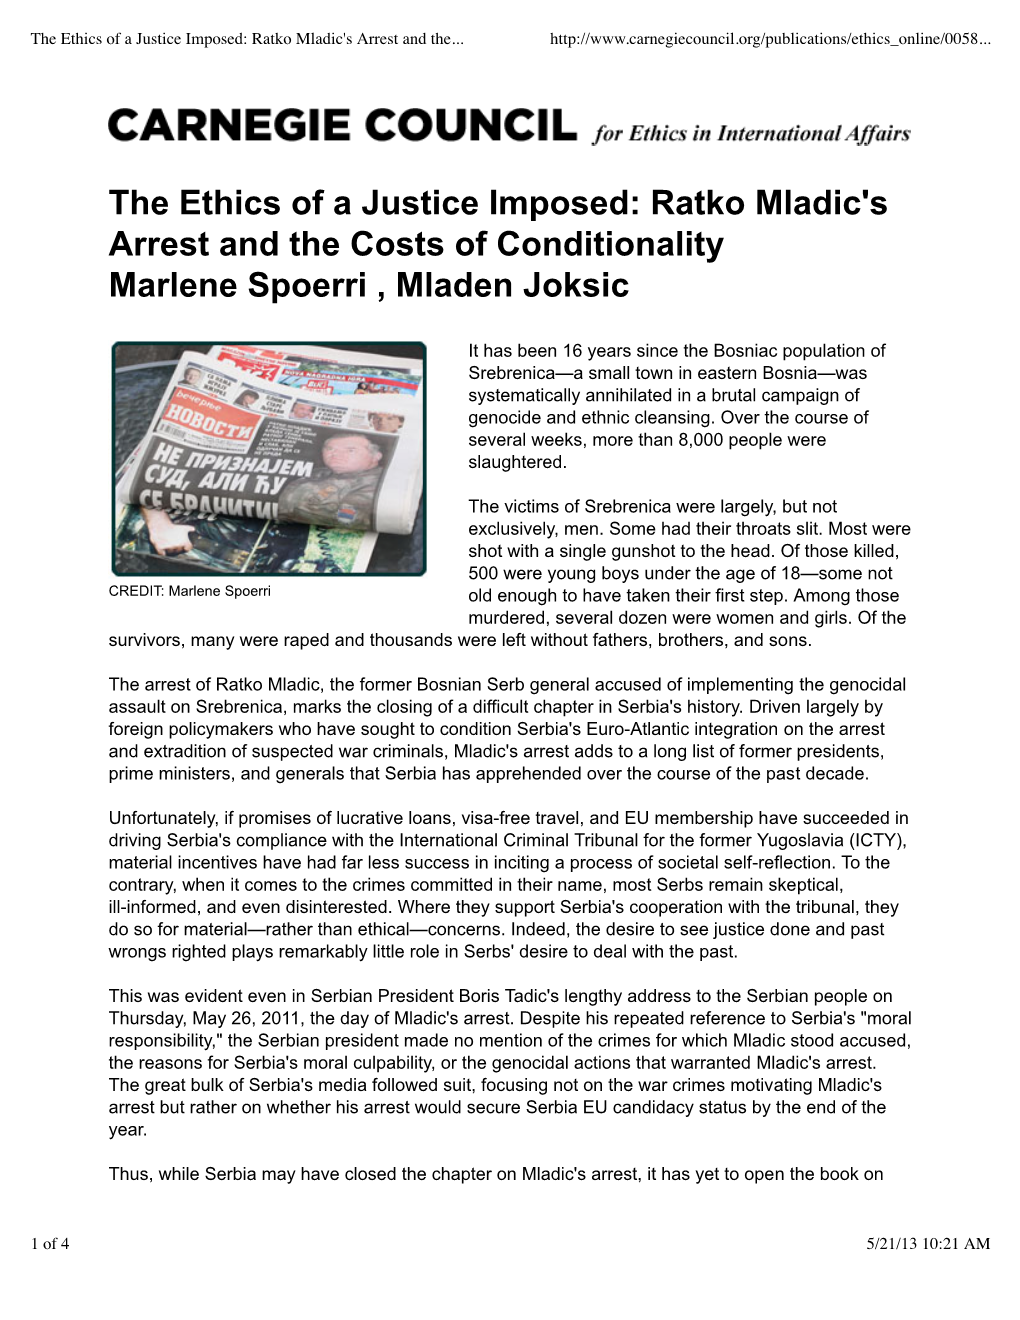 The Ethics of a Justice Imposed: Ratko Mladic's Arrest and The